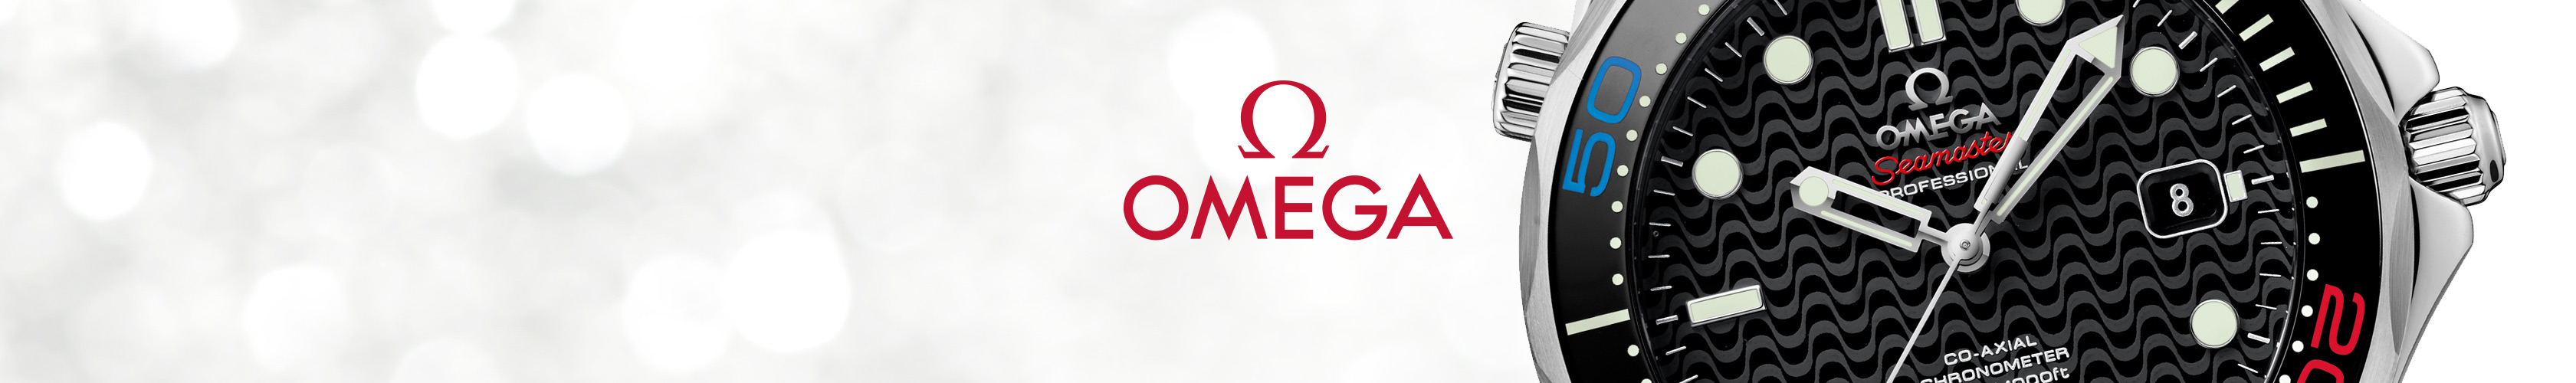 OMEGA Special Edition